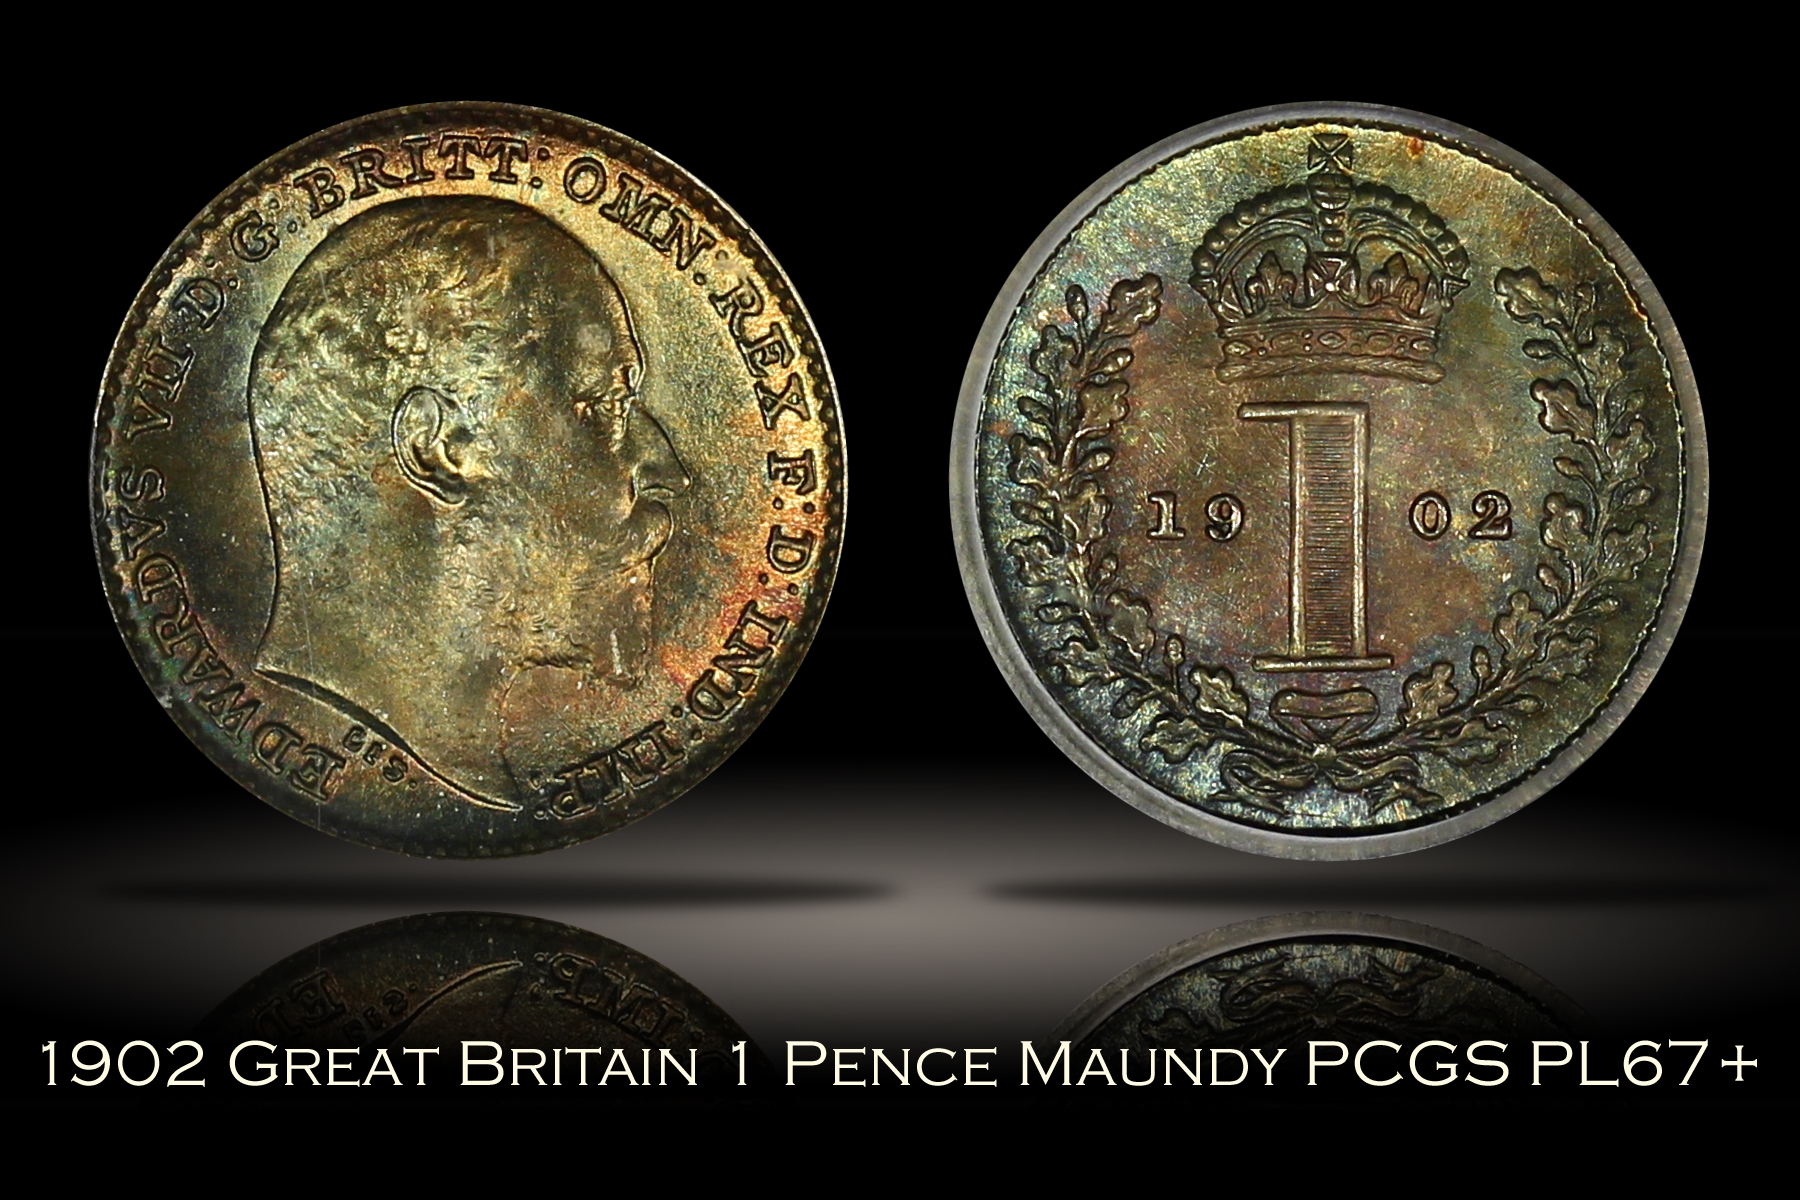 1902 Great Britain 1 Pence Maundy PCGS PL67+